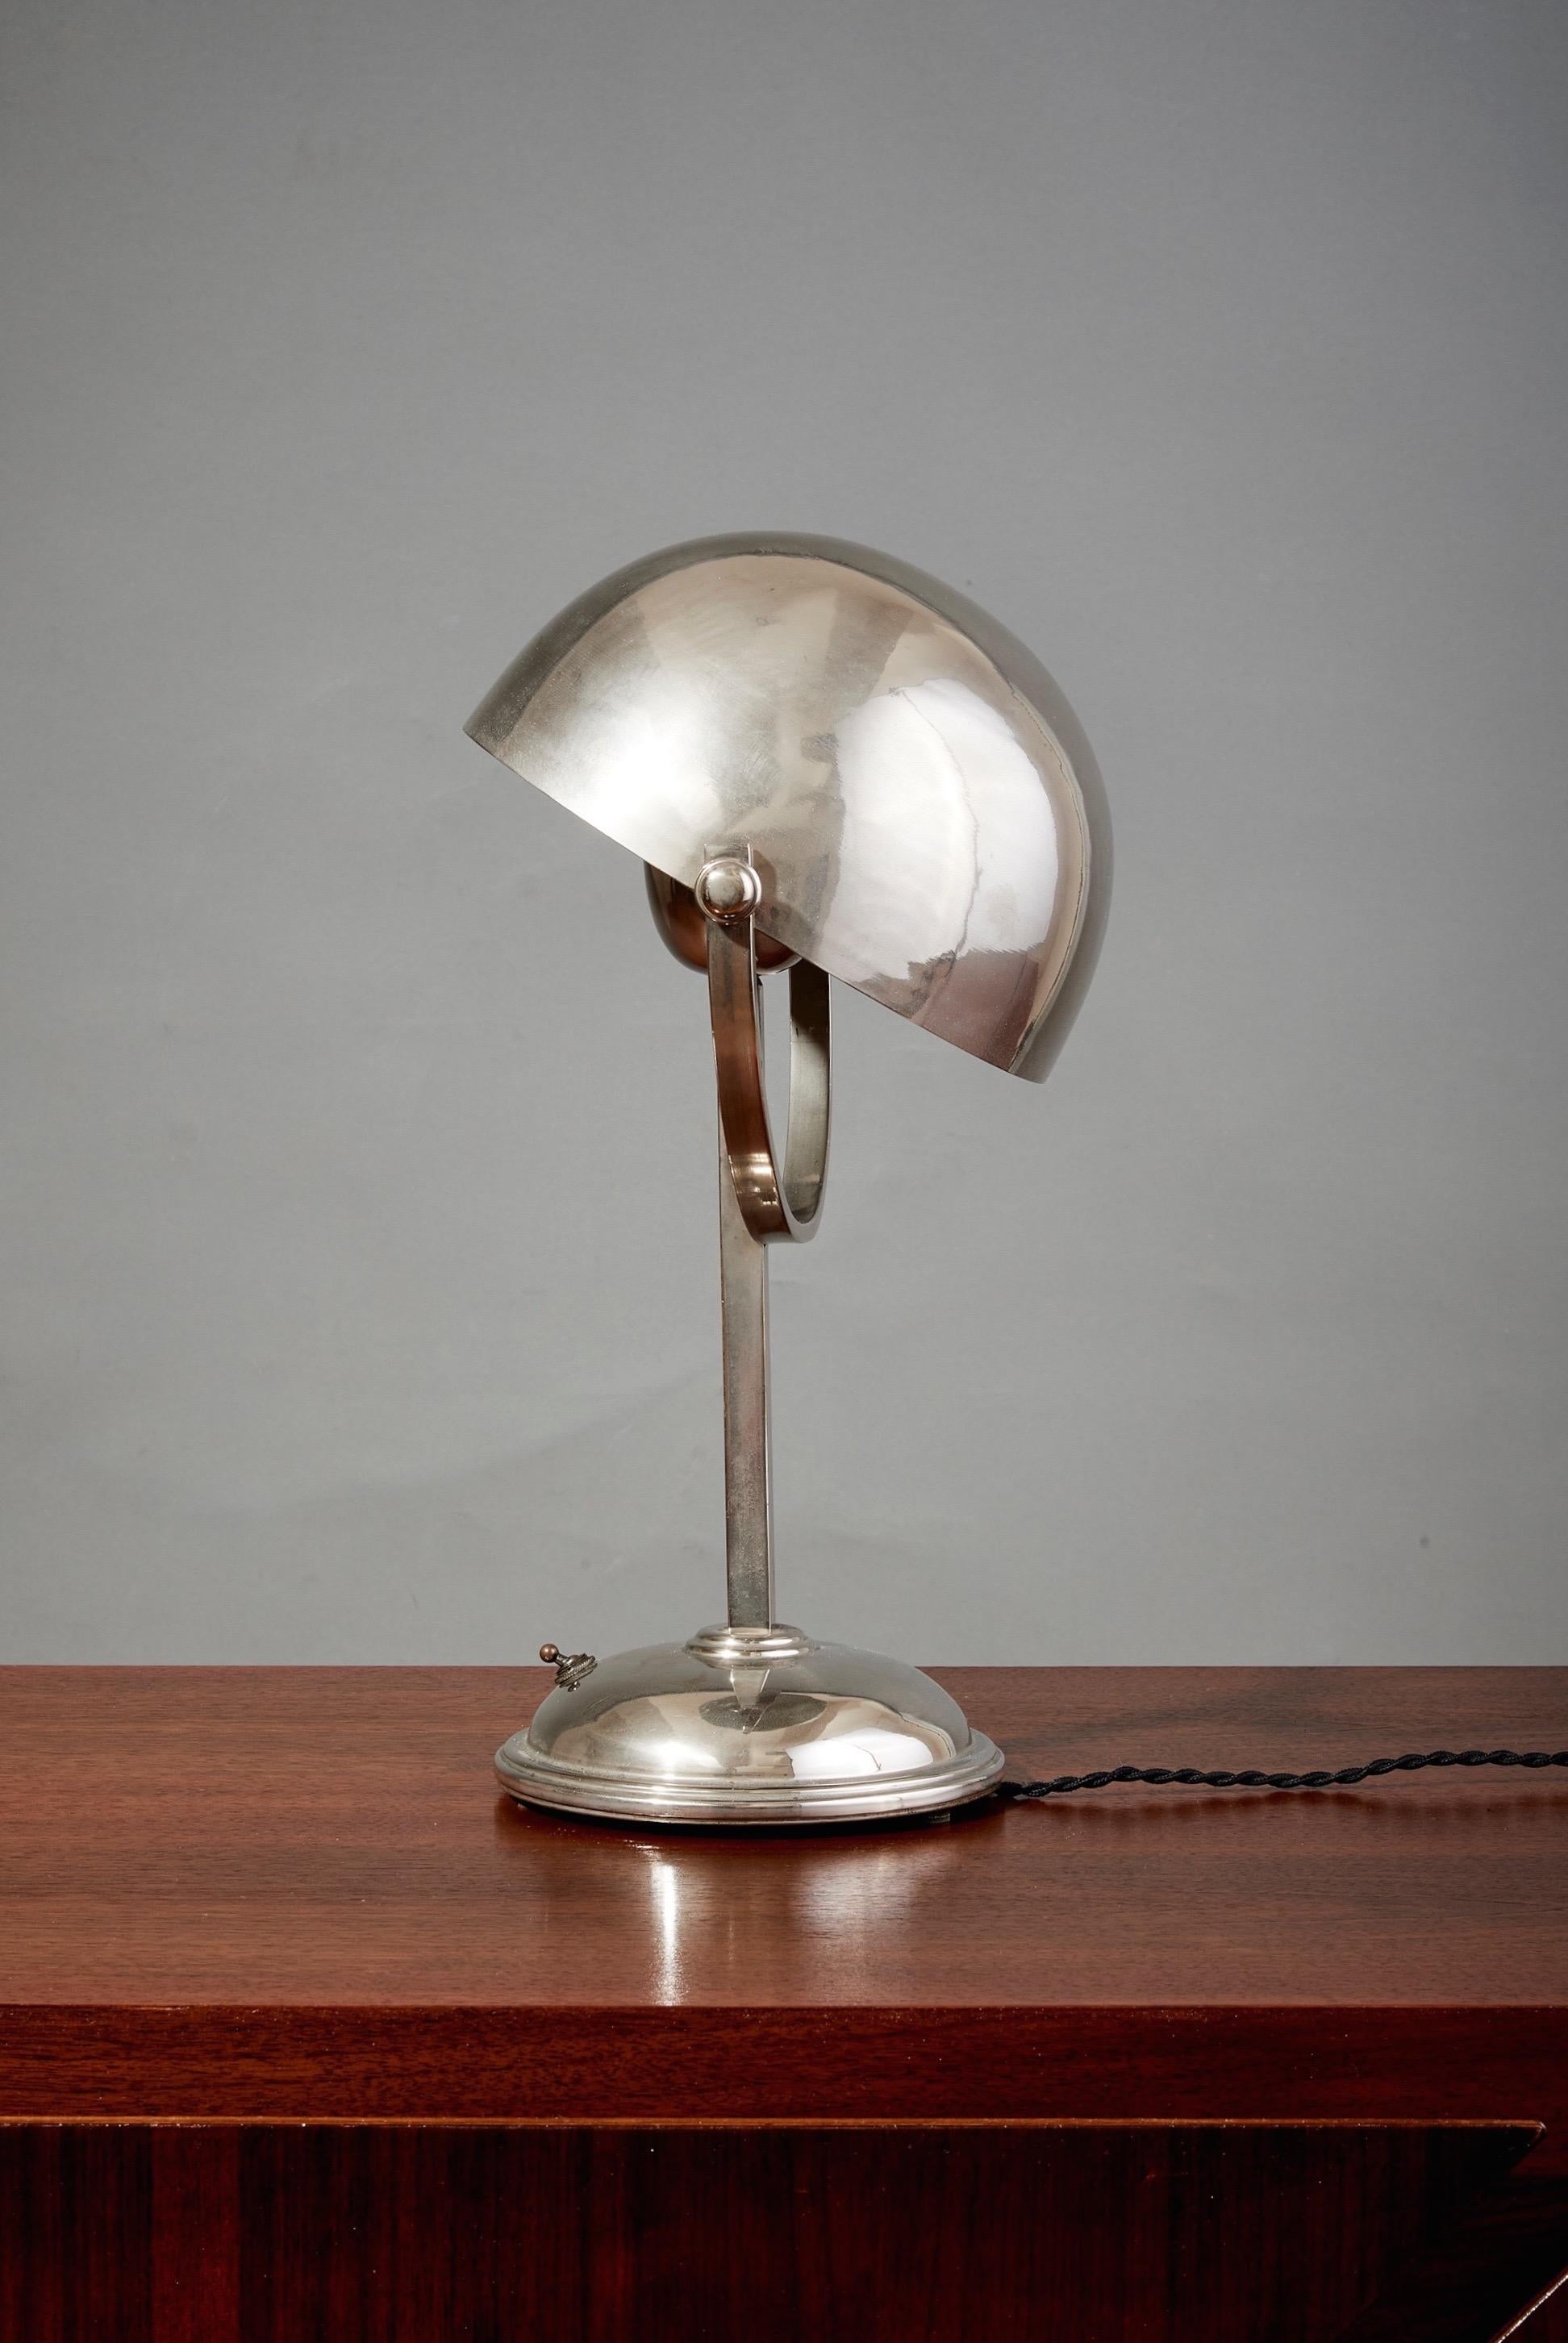 France, 1930's

A geometric Art Deco table lamp in nickel-plated brass in the style of Felix Aublet. The domed shade, fully articulated to direct light in the direction of the sitter's choosing, angles over a half-moon arch to trace a full sphere.